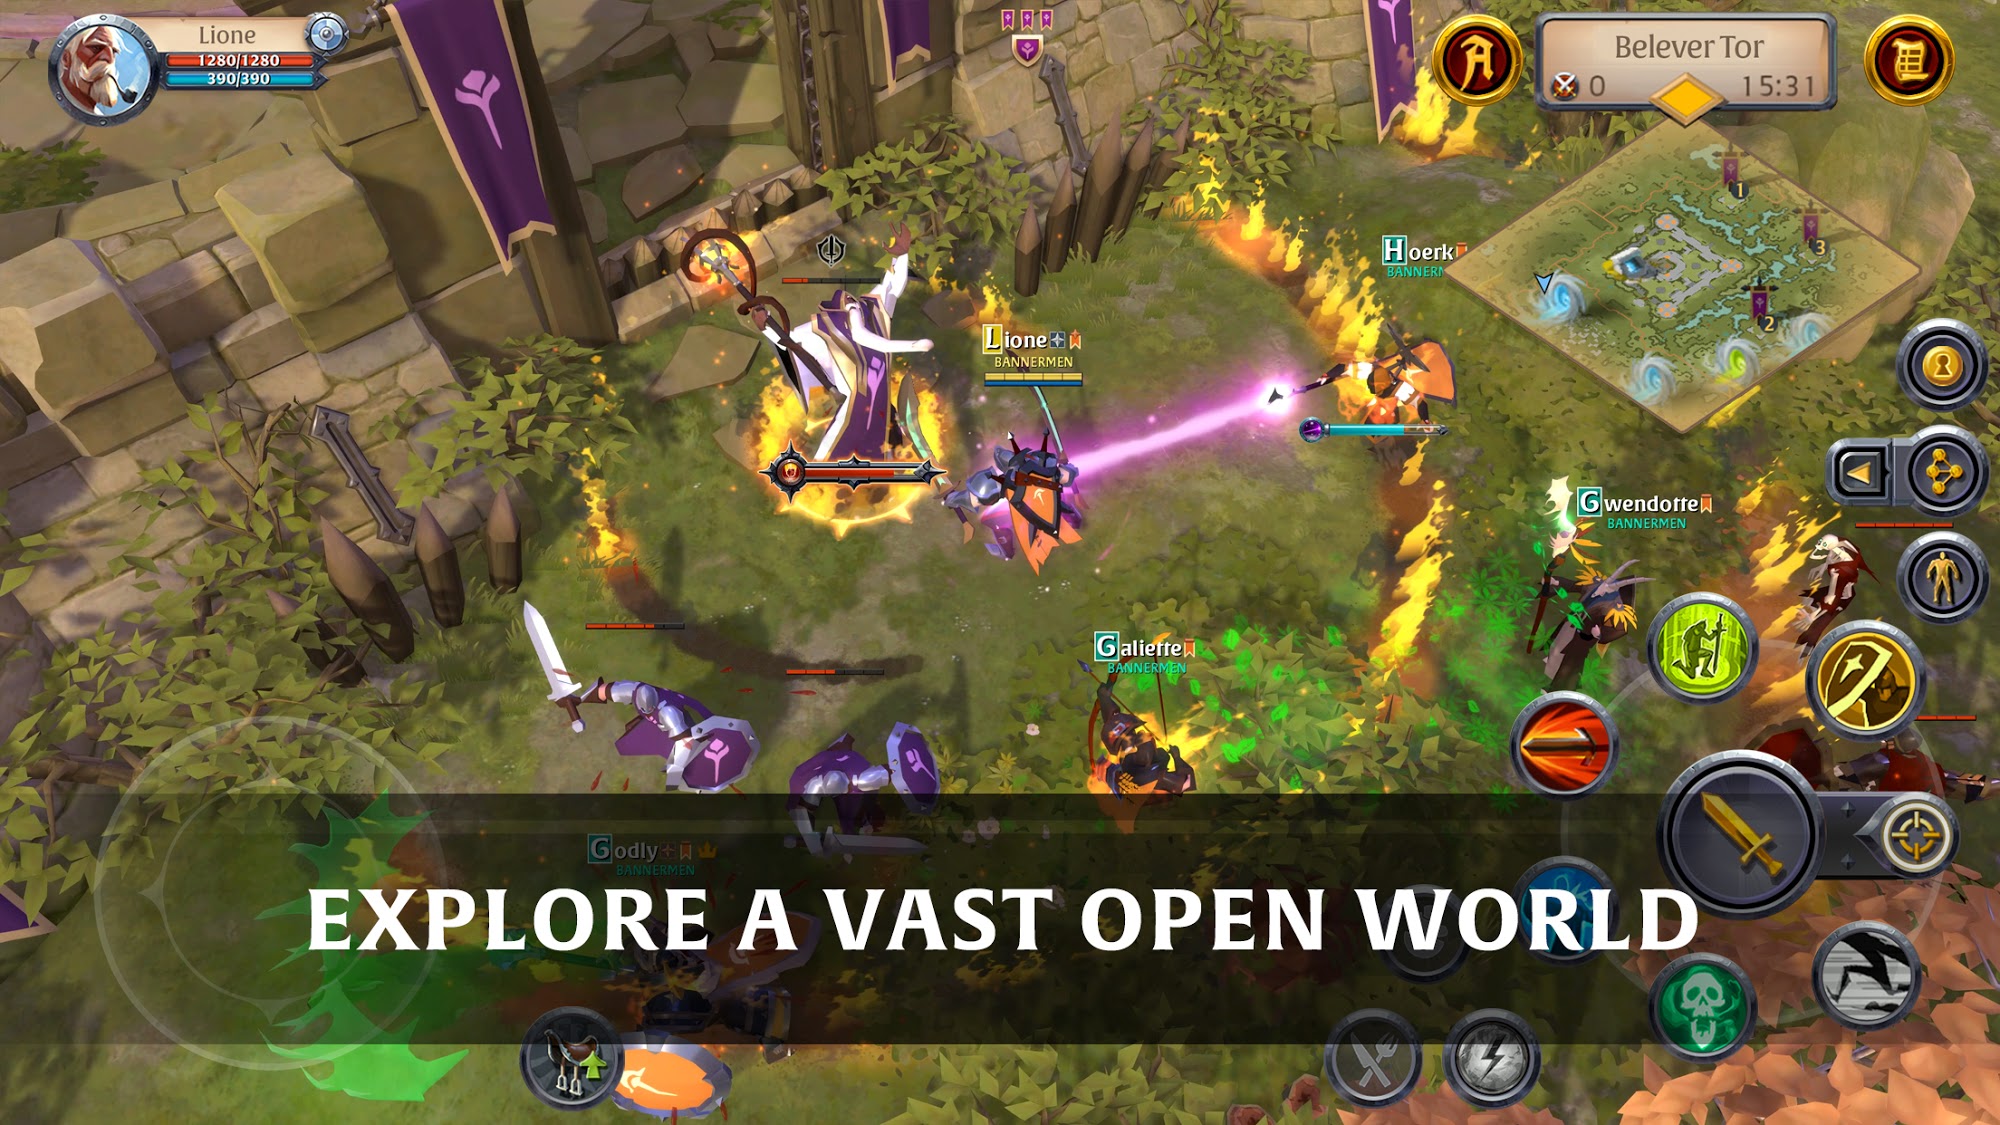 Albion Online para Android - Baixe o APK na Uptodown